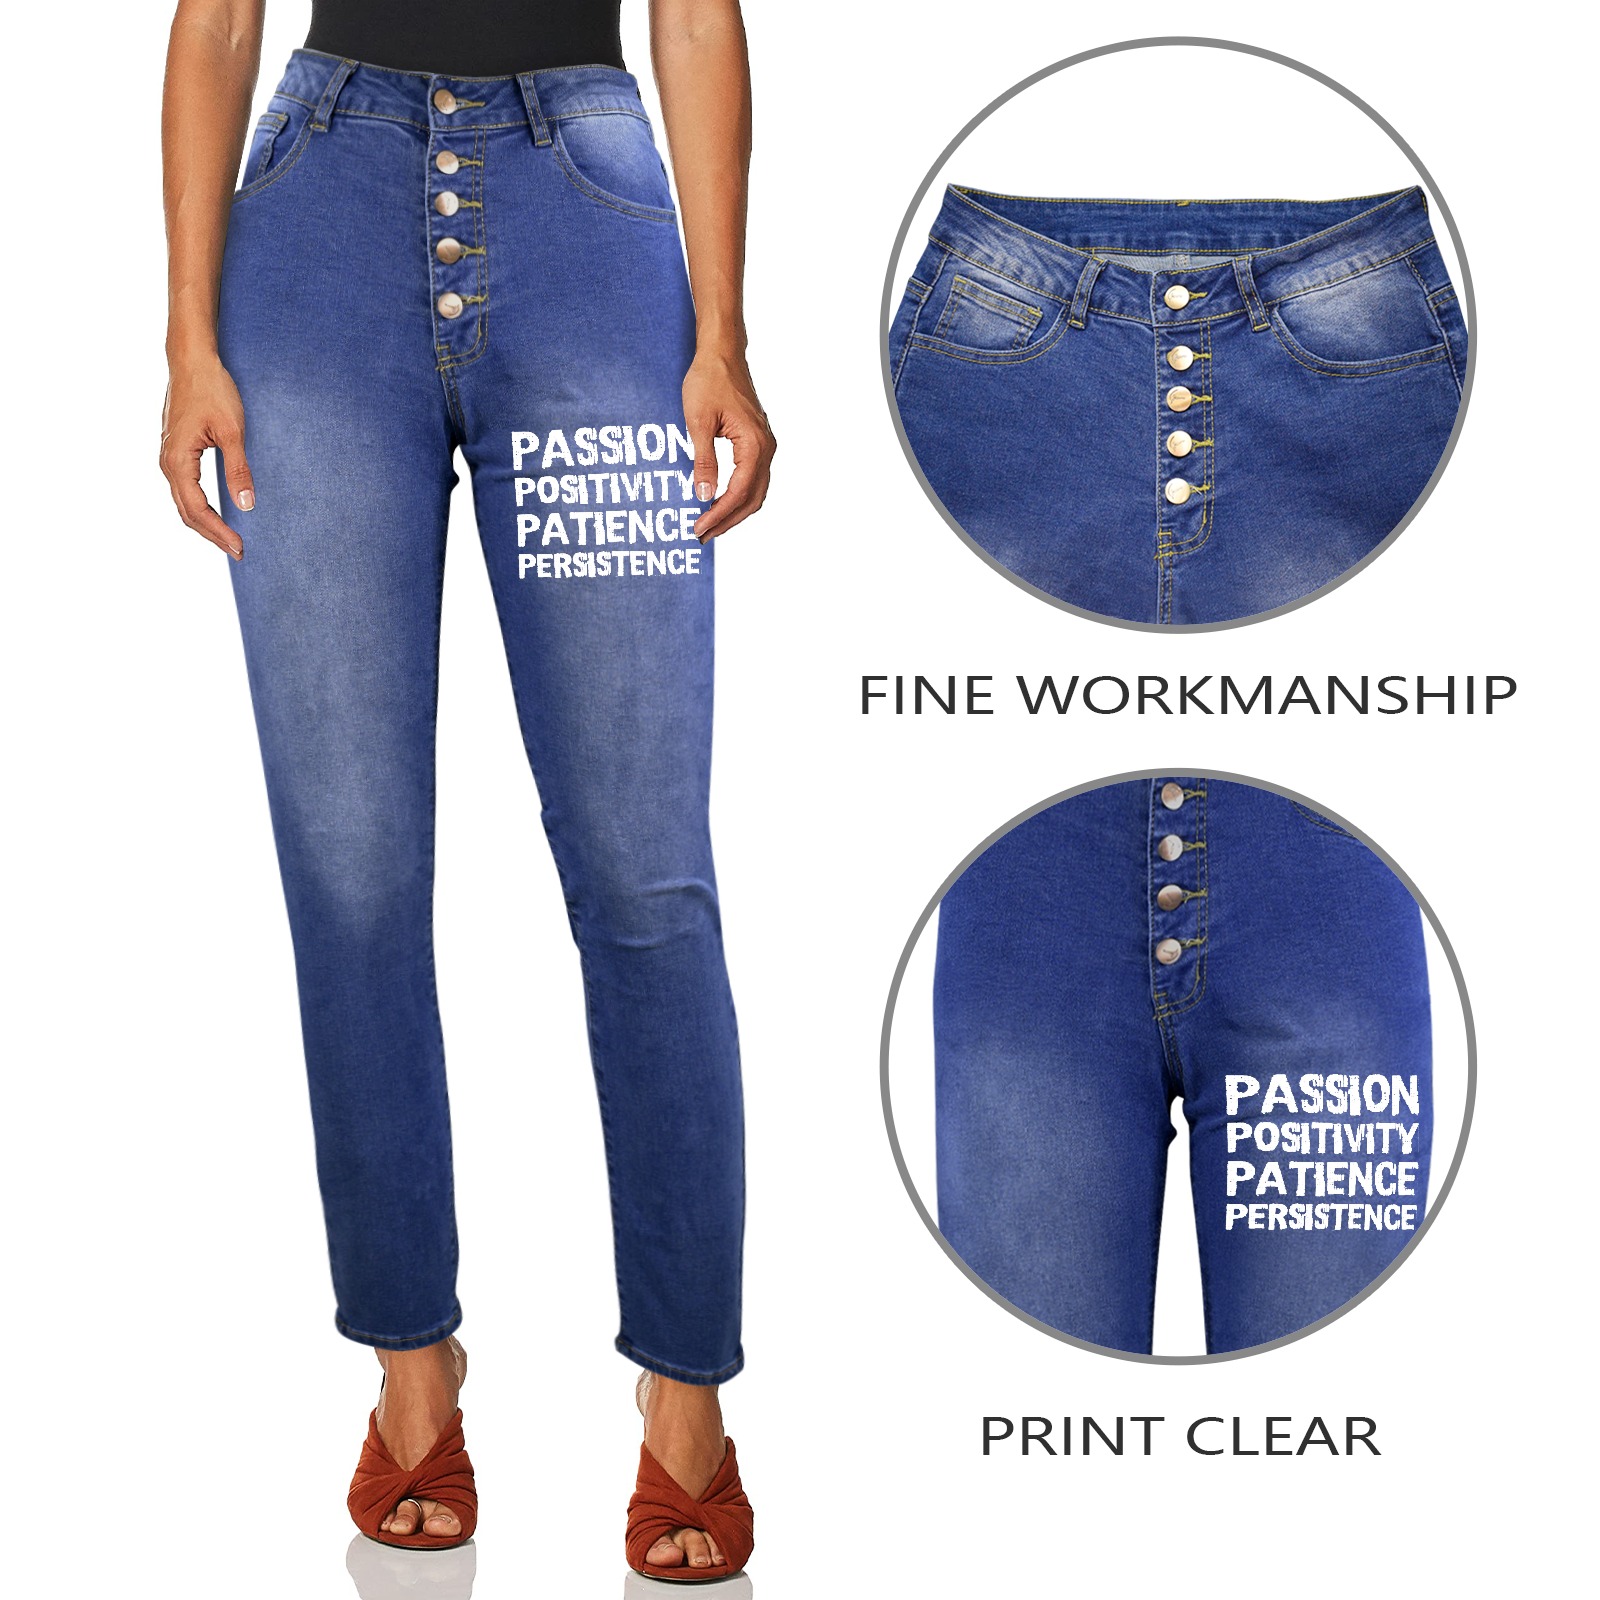 Passion, positivity, patience, persistence white Women's Jeans (Front Printing)